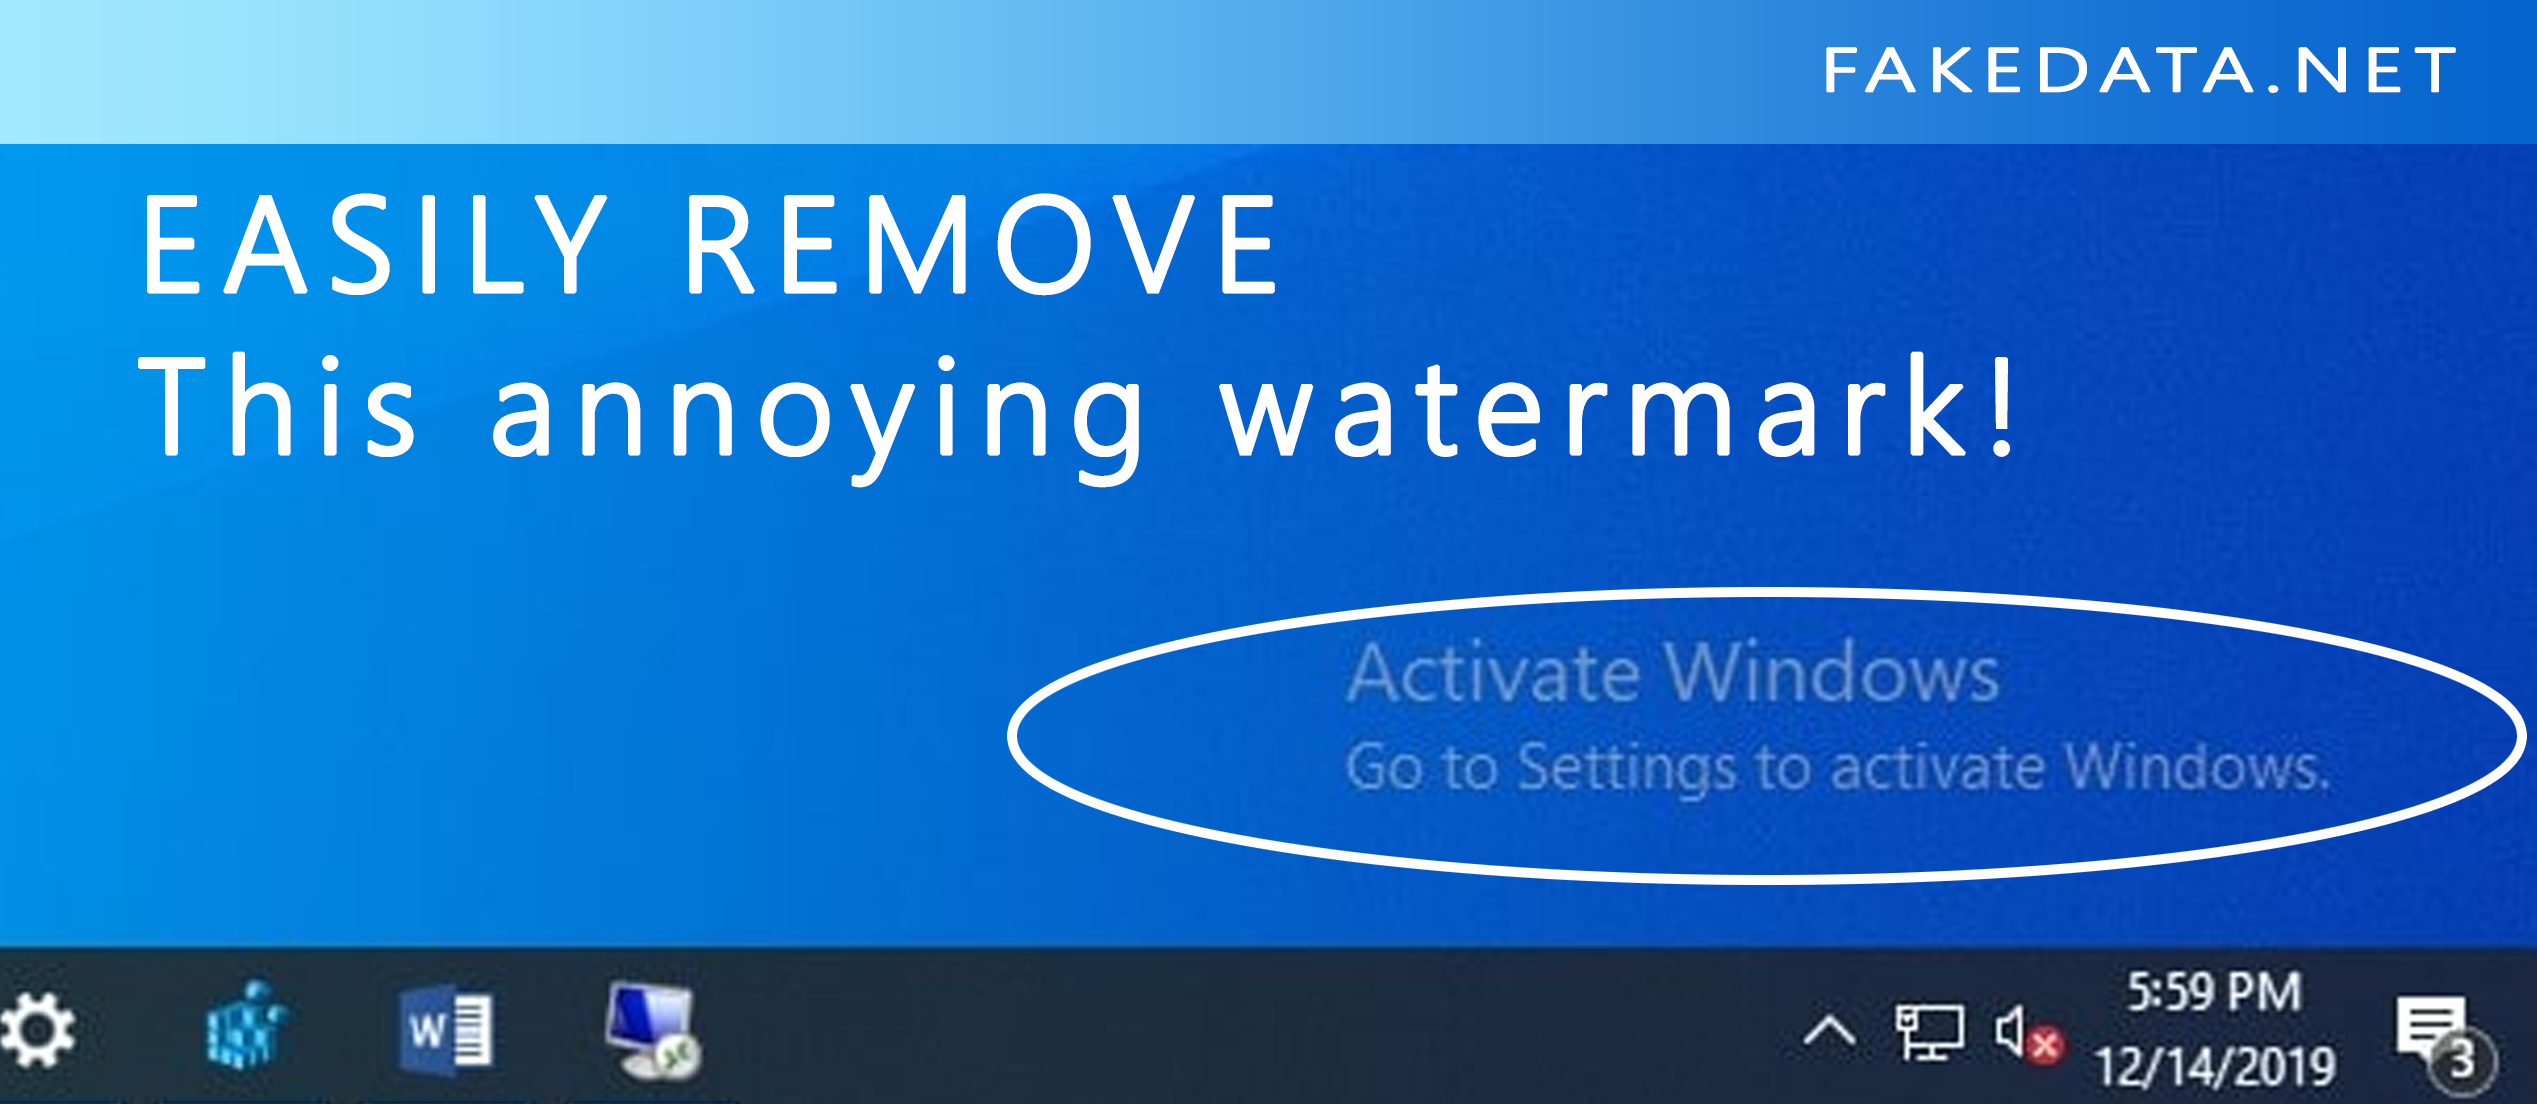 for windows instal HitPaw Watermark Remover